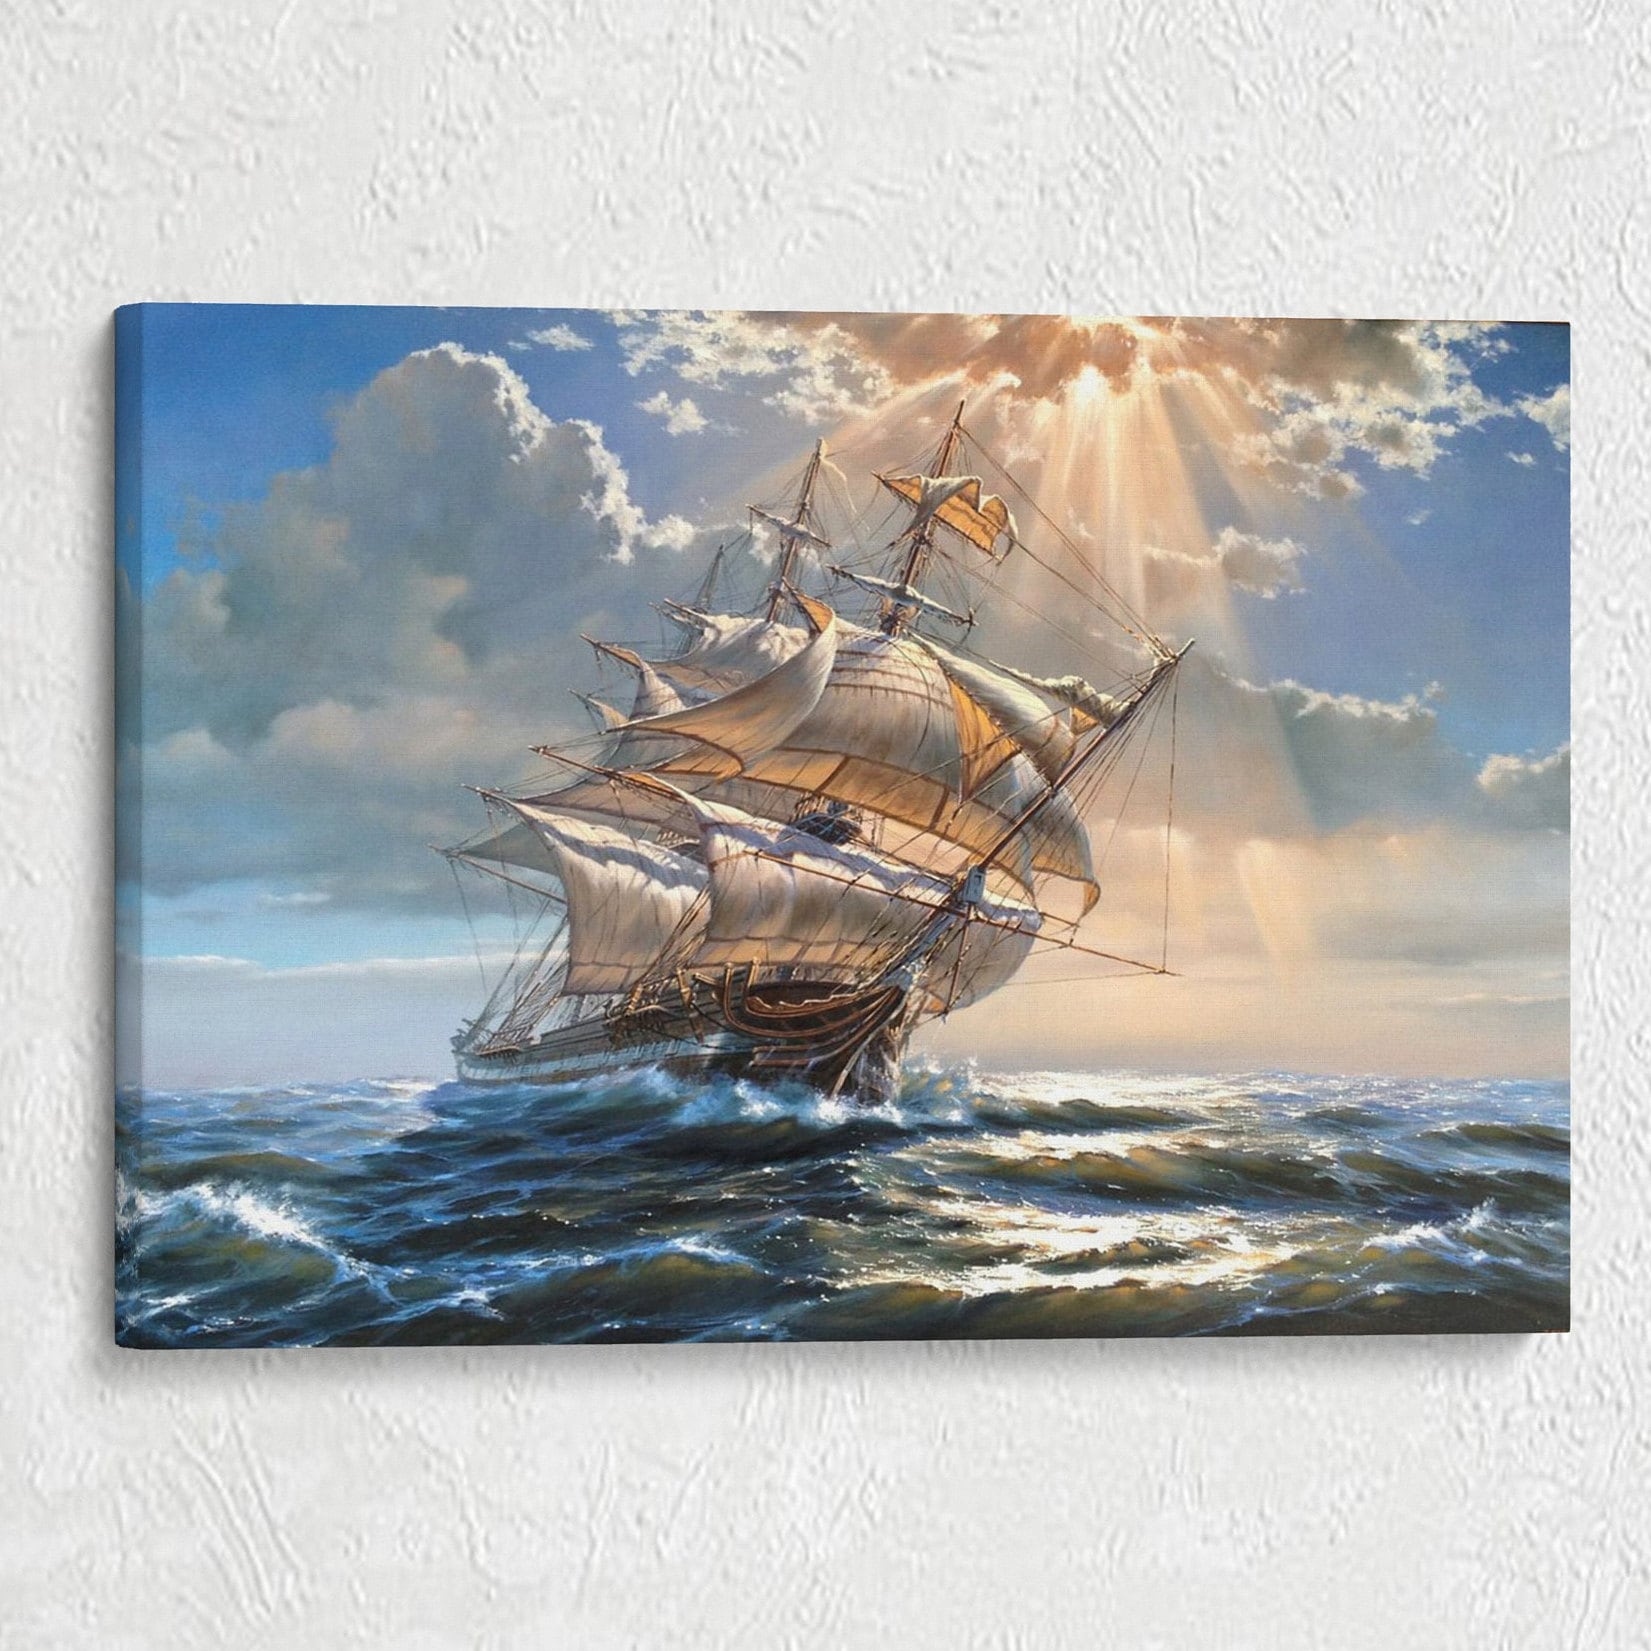 Ship Canvas, Pirate Ship Painting, Rowing Boat Wall Art, Huge